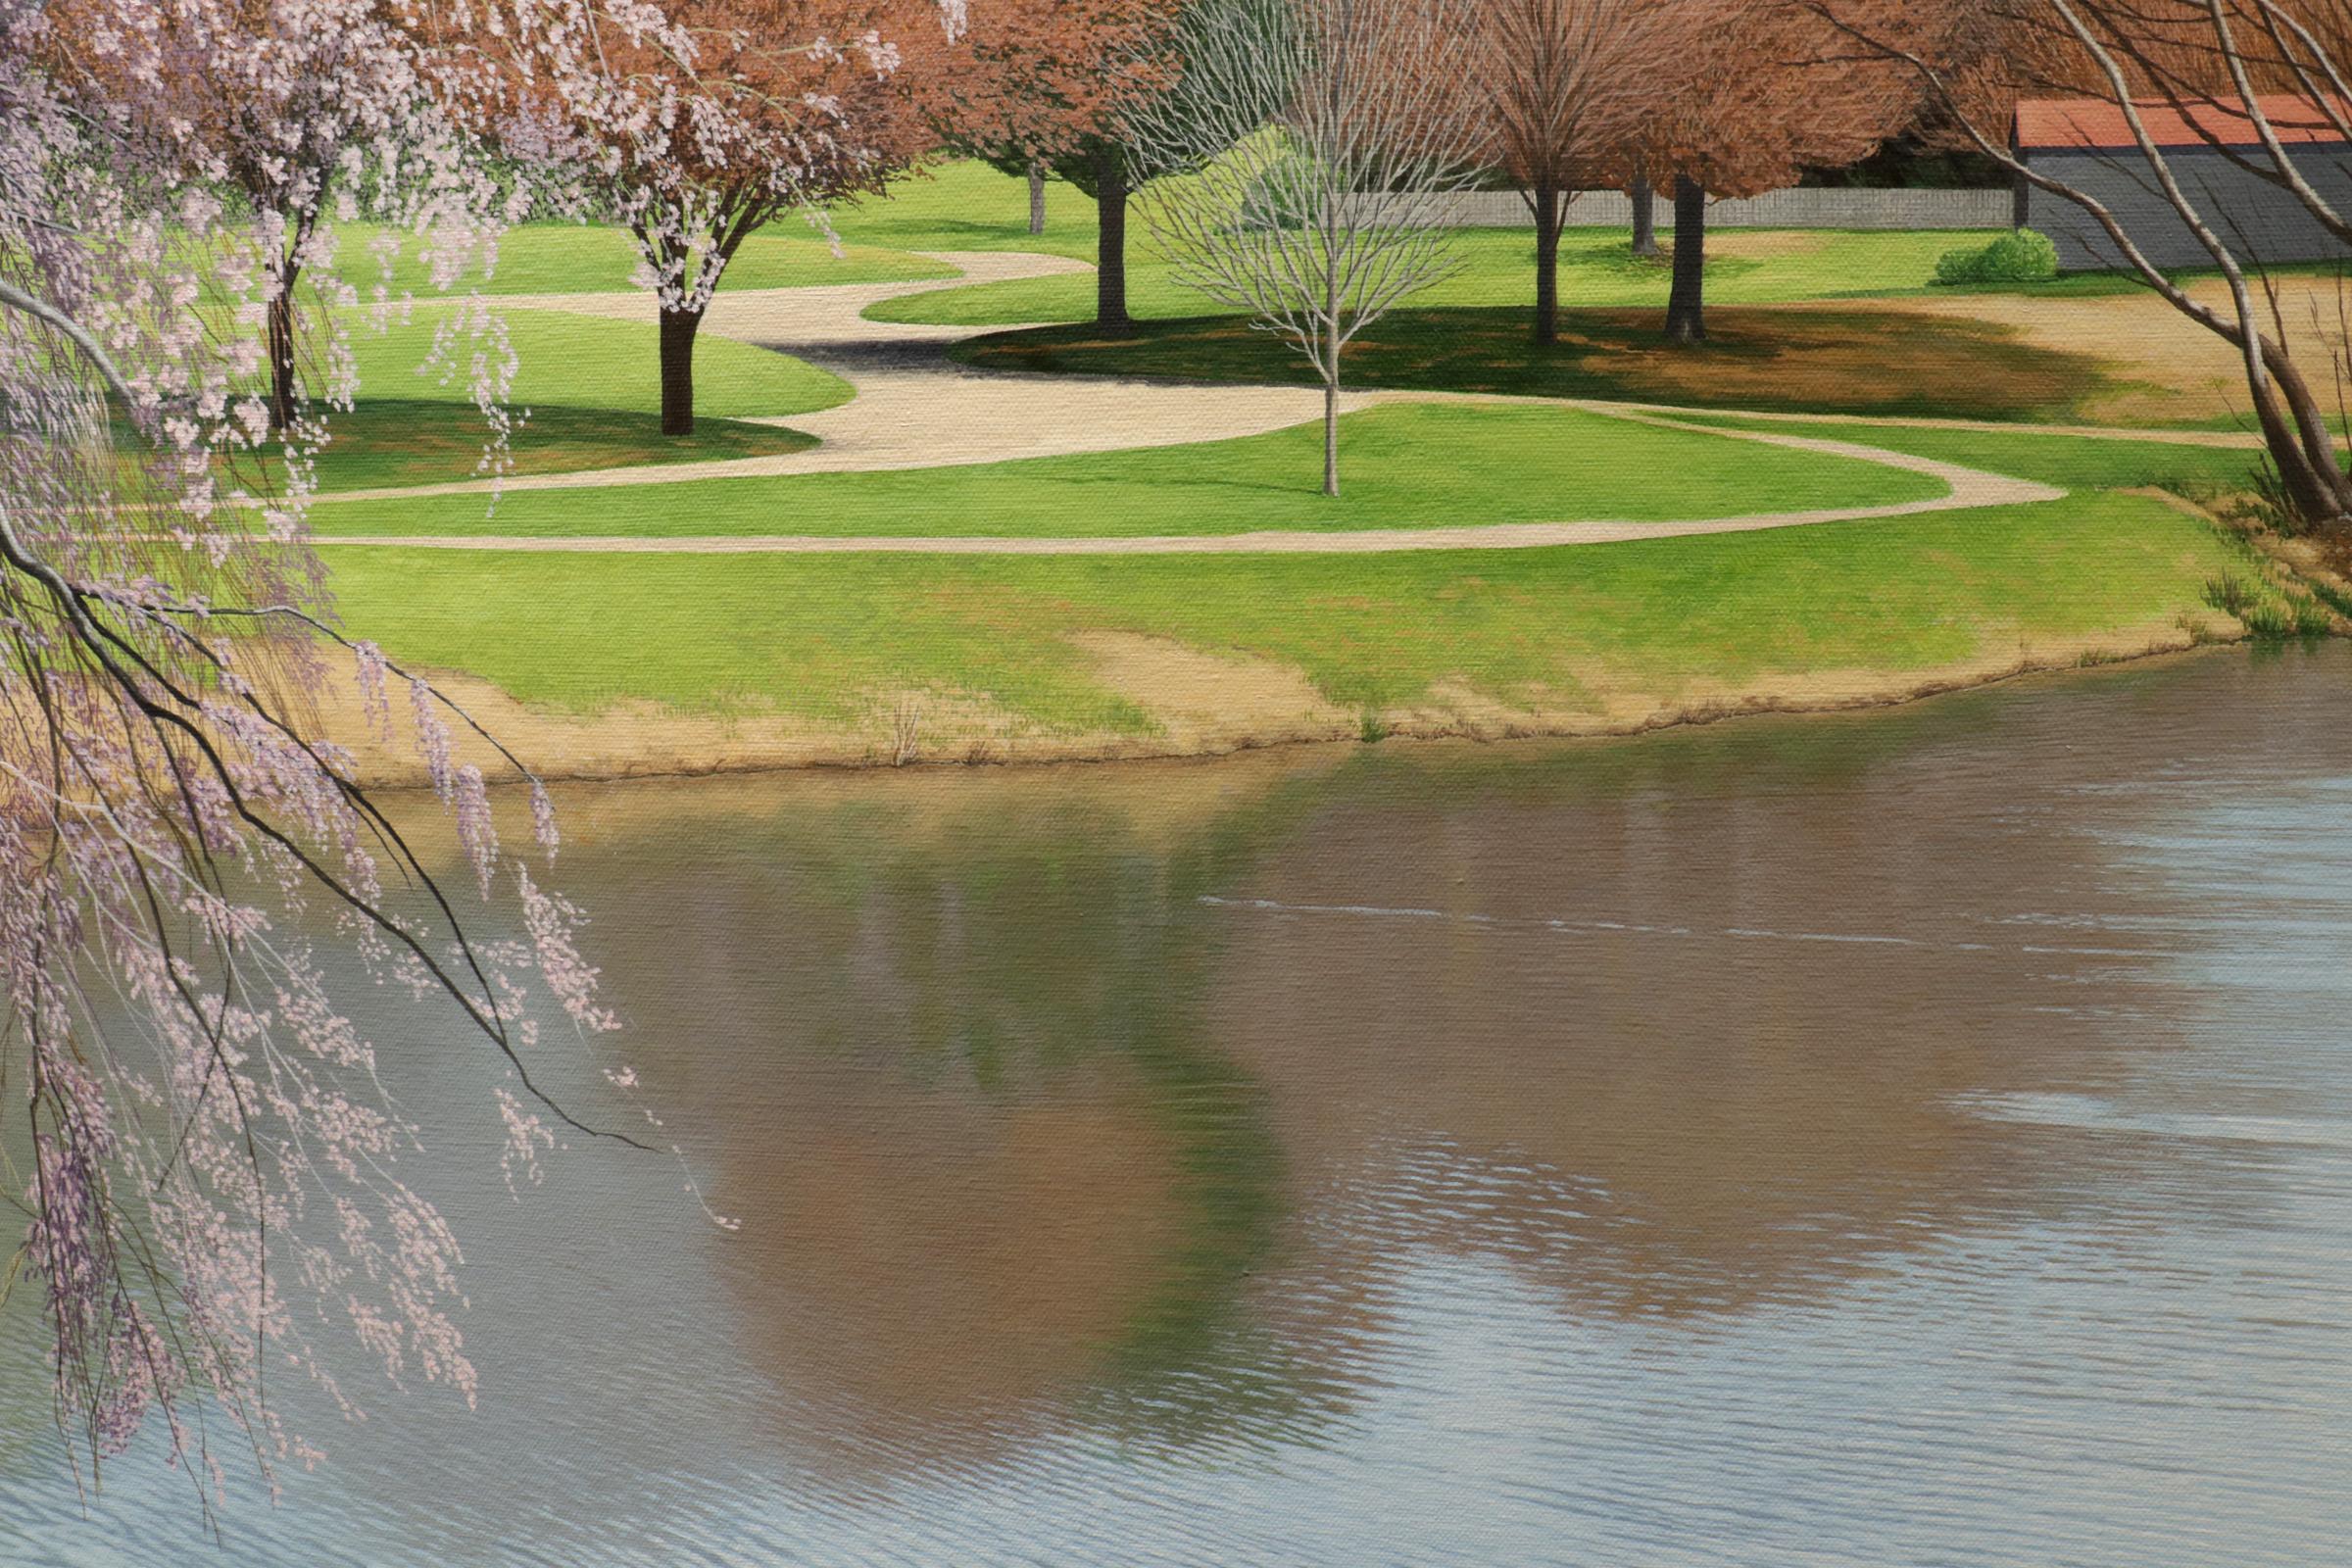 LONGSTREET FARM - Contemporary Landscape / Cherry Blossom / Park Scene with Pond - Painting by Anita Mazzucca